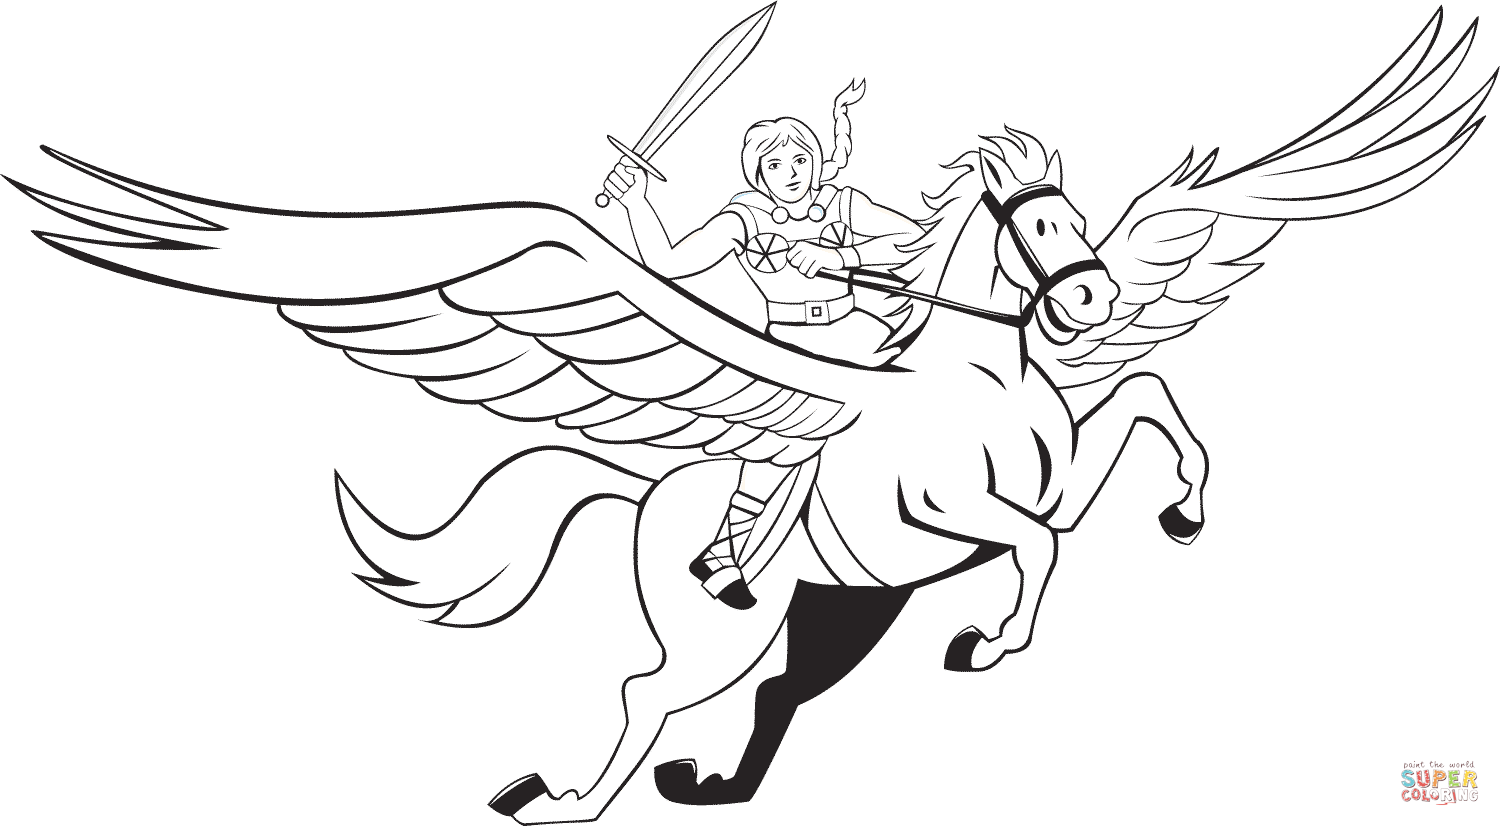 Valkyrie Riding Pegasus coloring page | Free Printable Coloring Pages